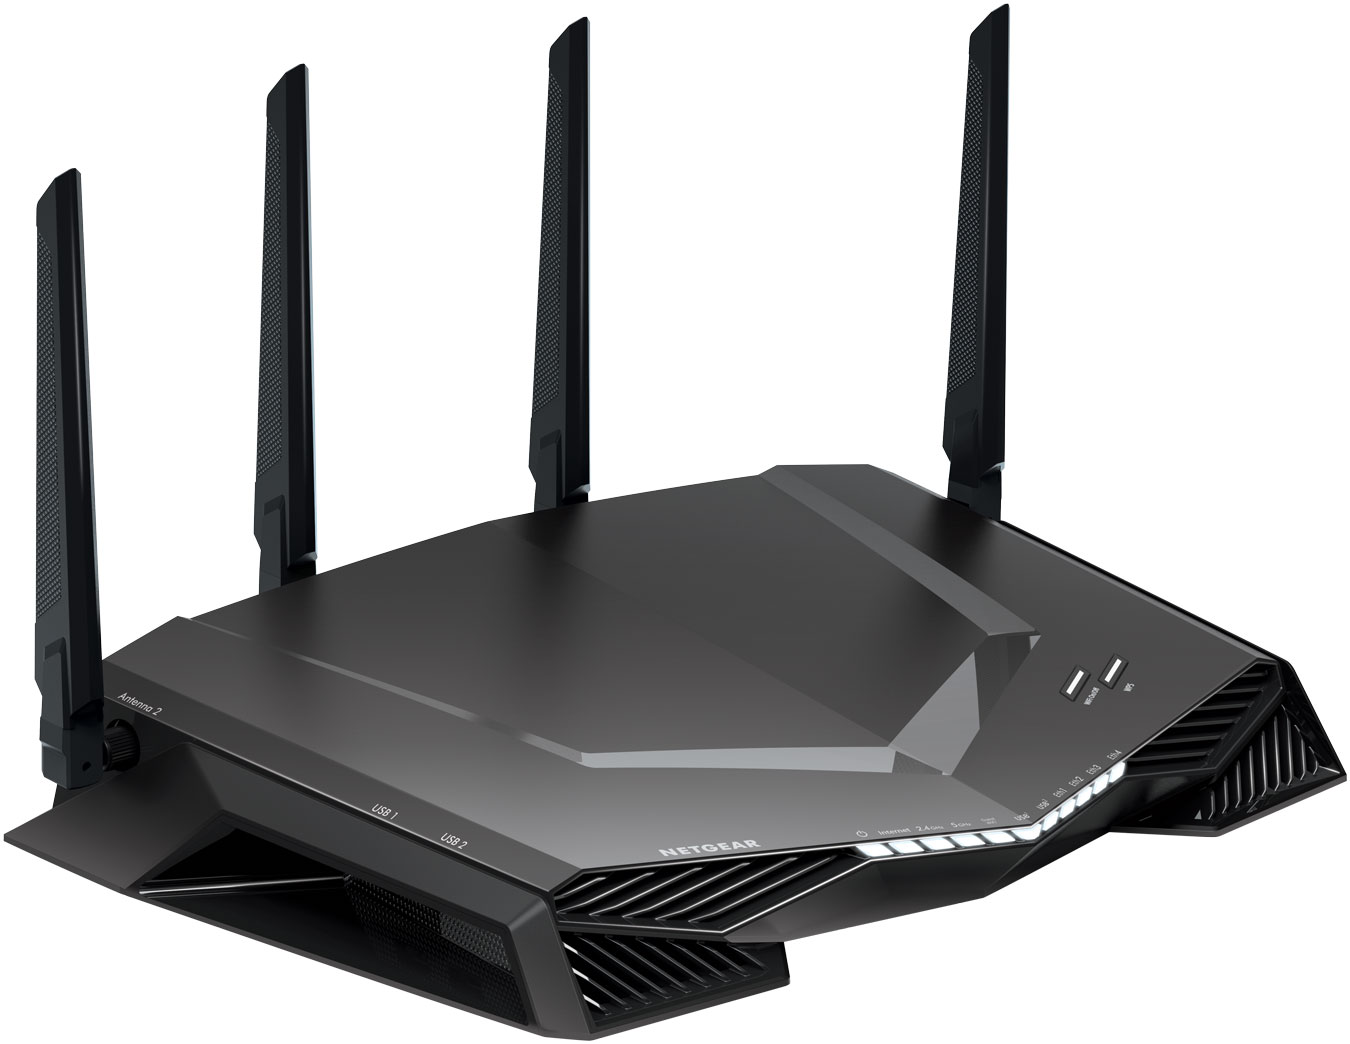 netgear-launches-attack-against-lag-with-nighthawk-pro-gaming-router